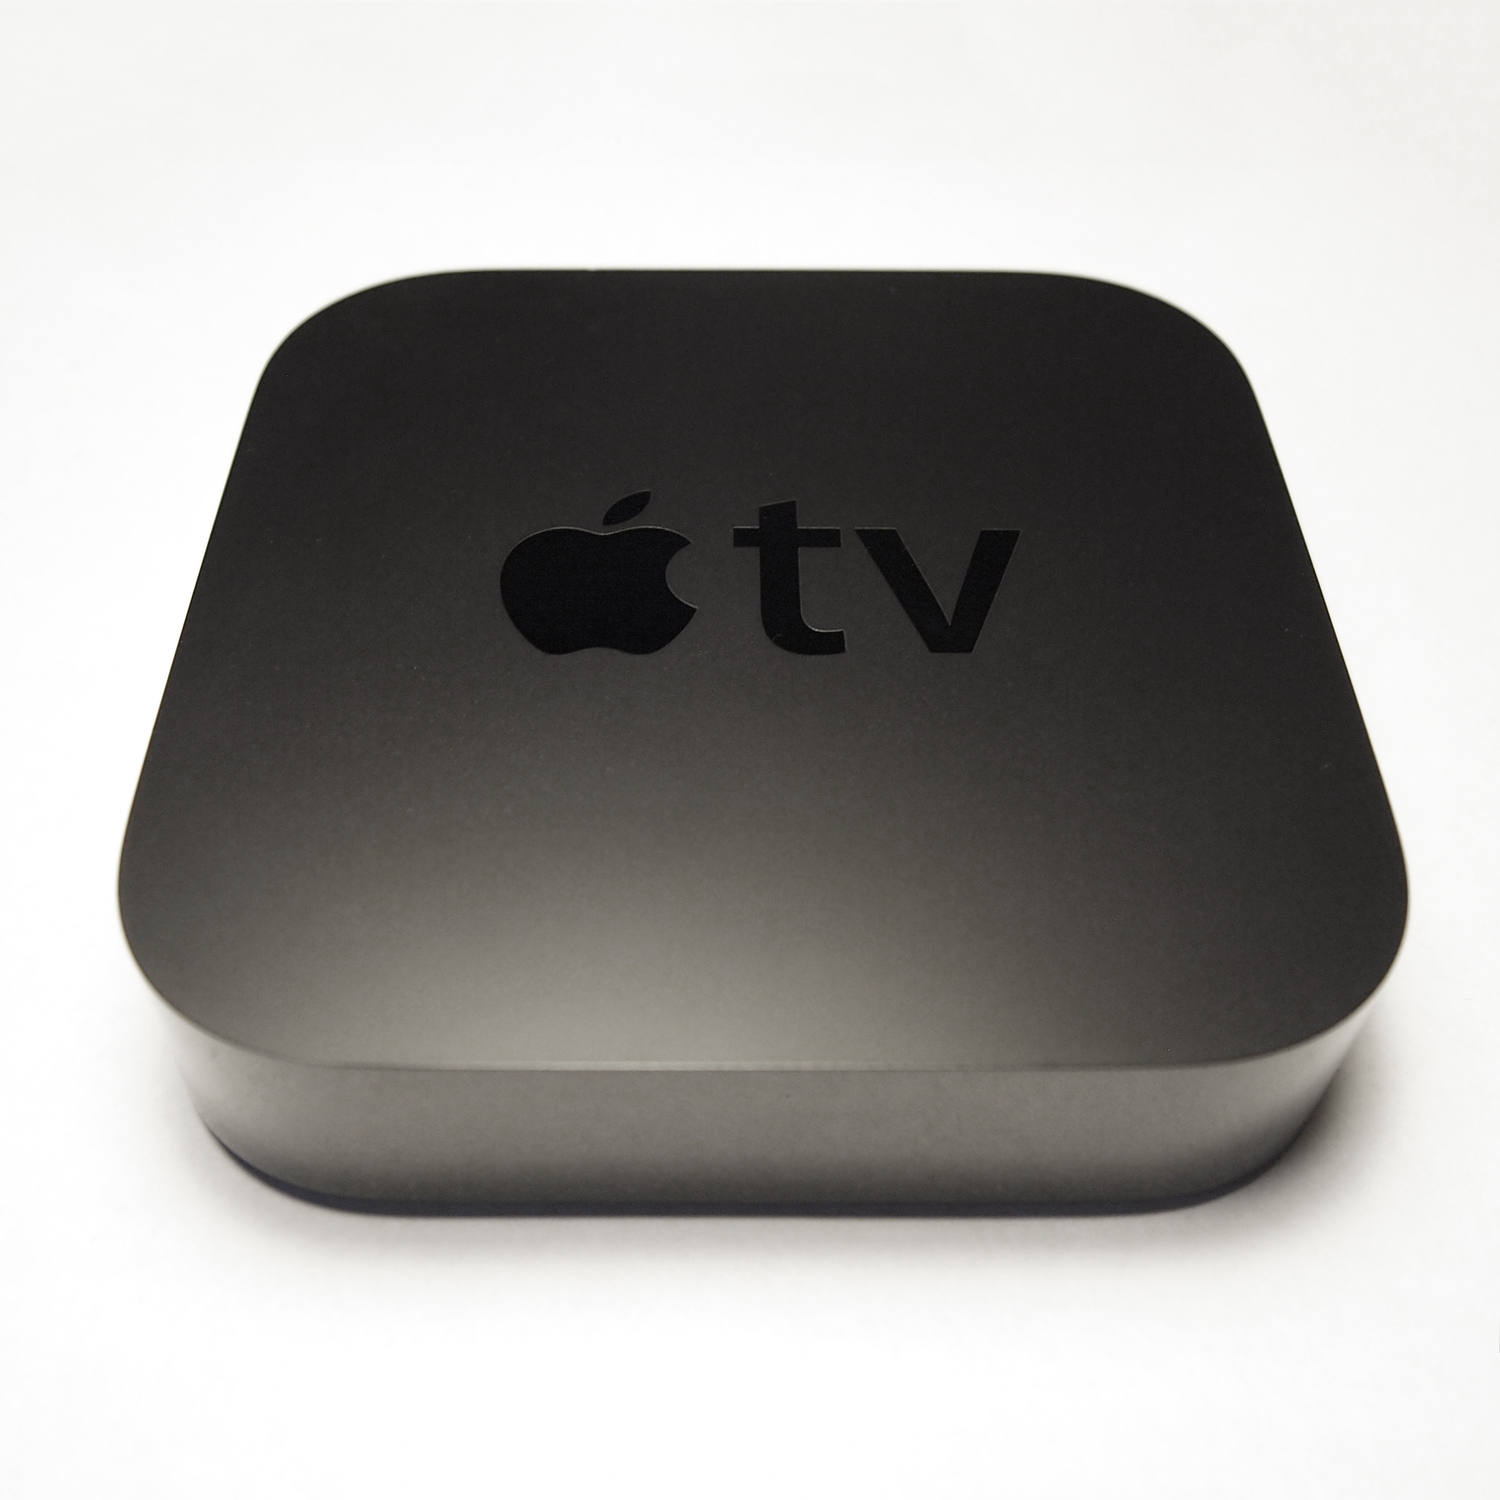 The Future of TV is Apple?